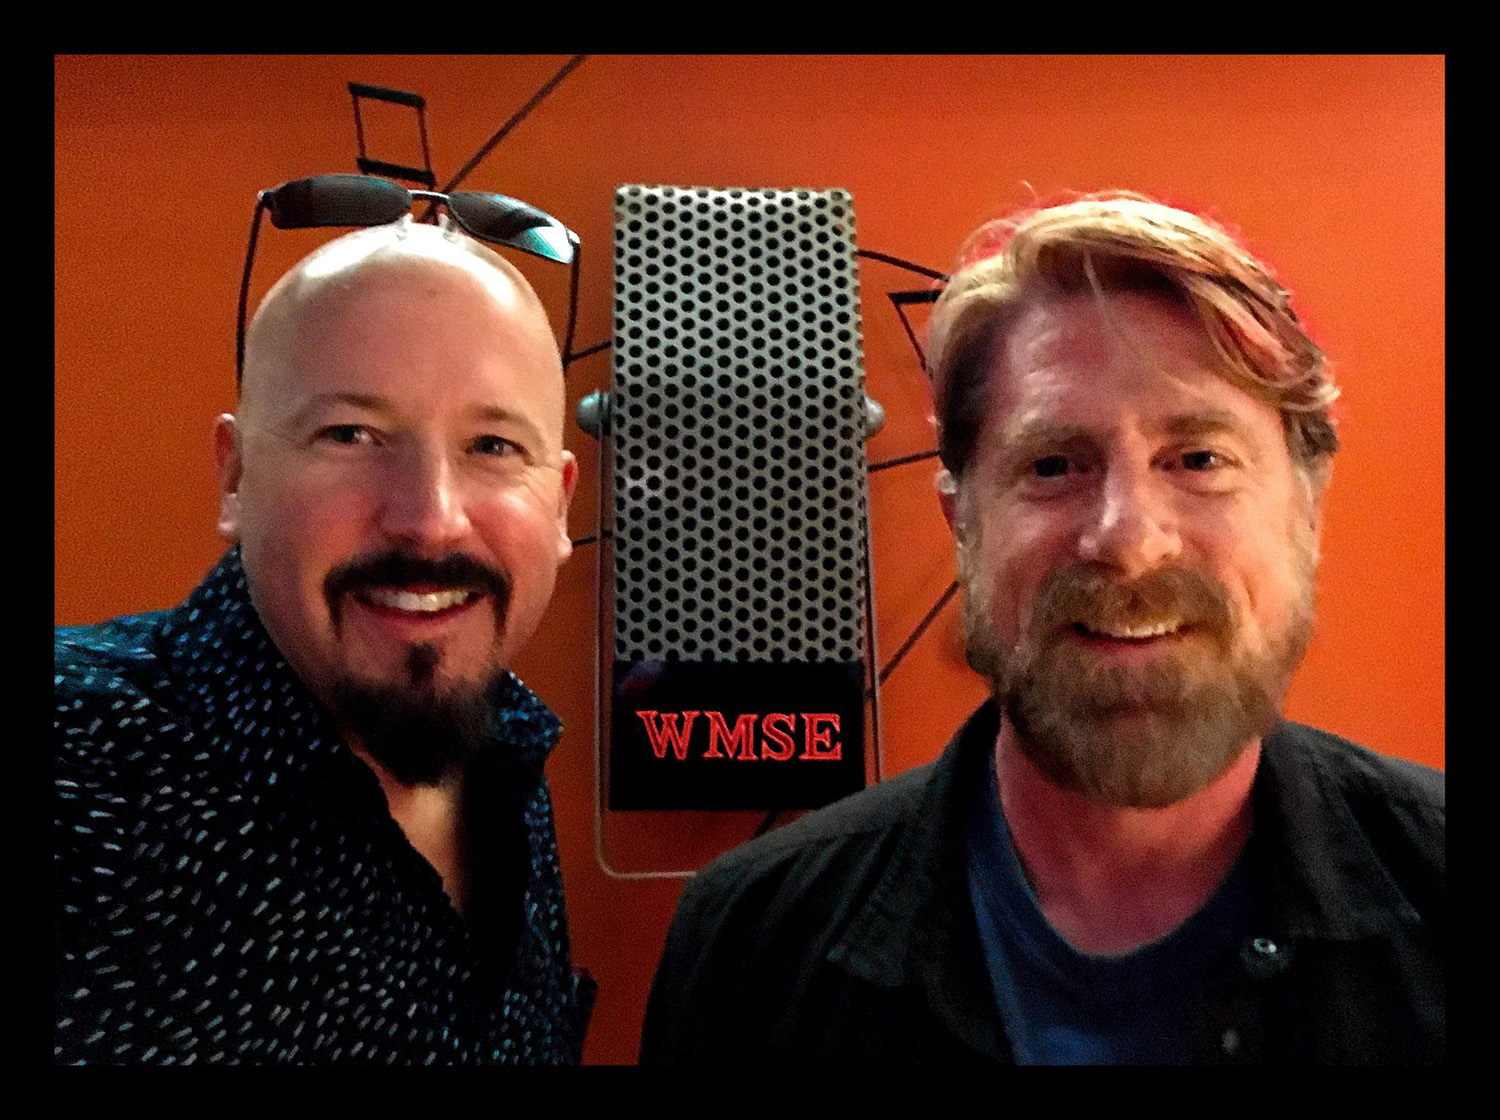 DAVID AND JON JENKINS ON THE AIR AT WMSE IN MILWAUKEE